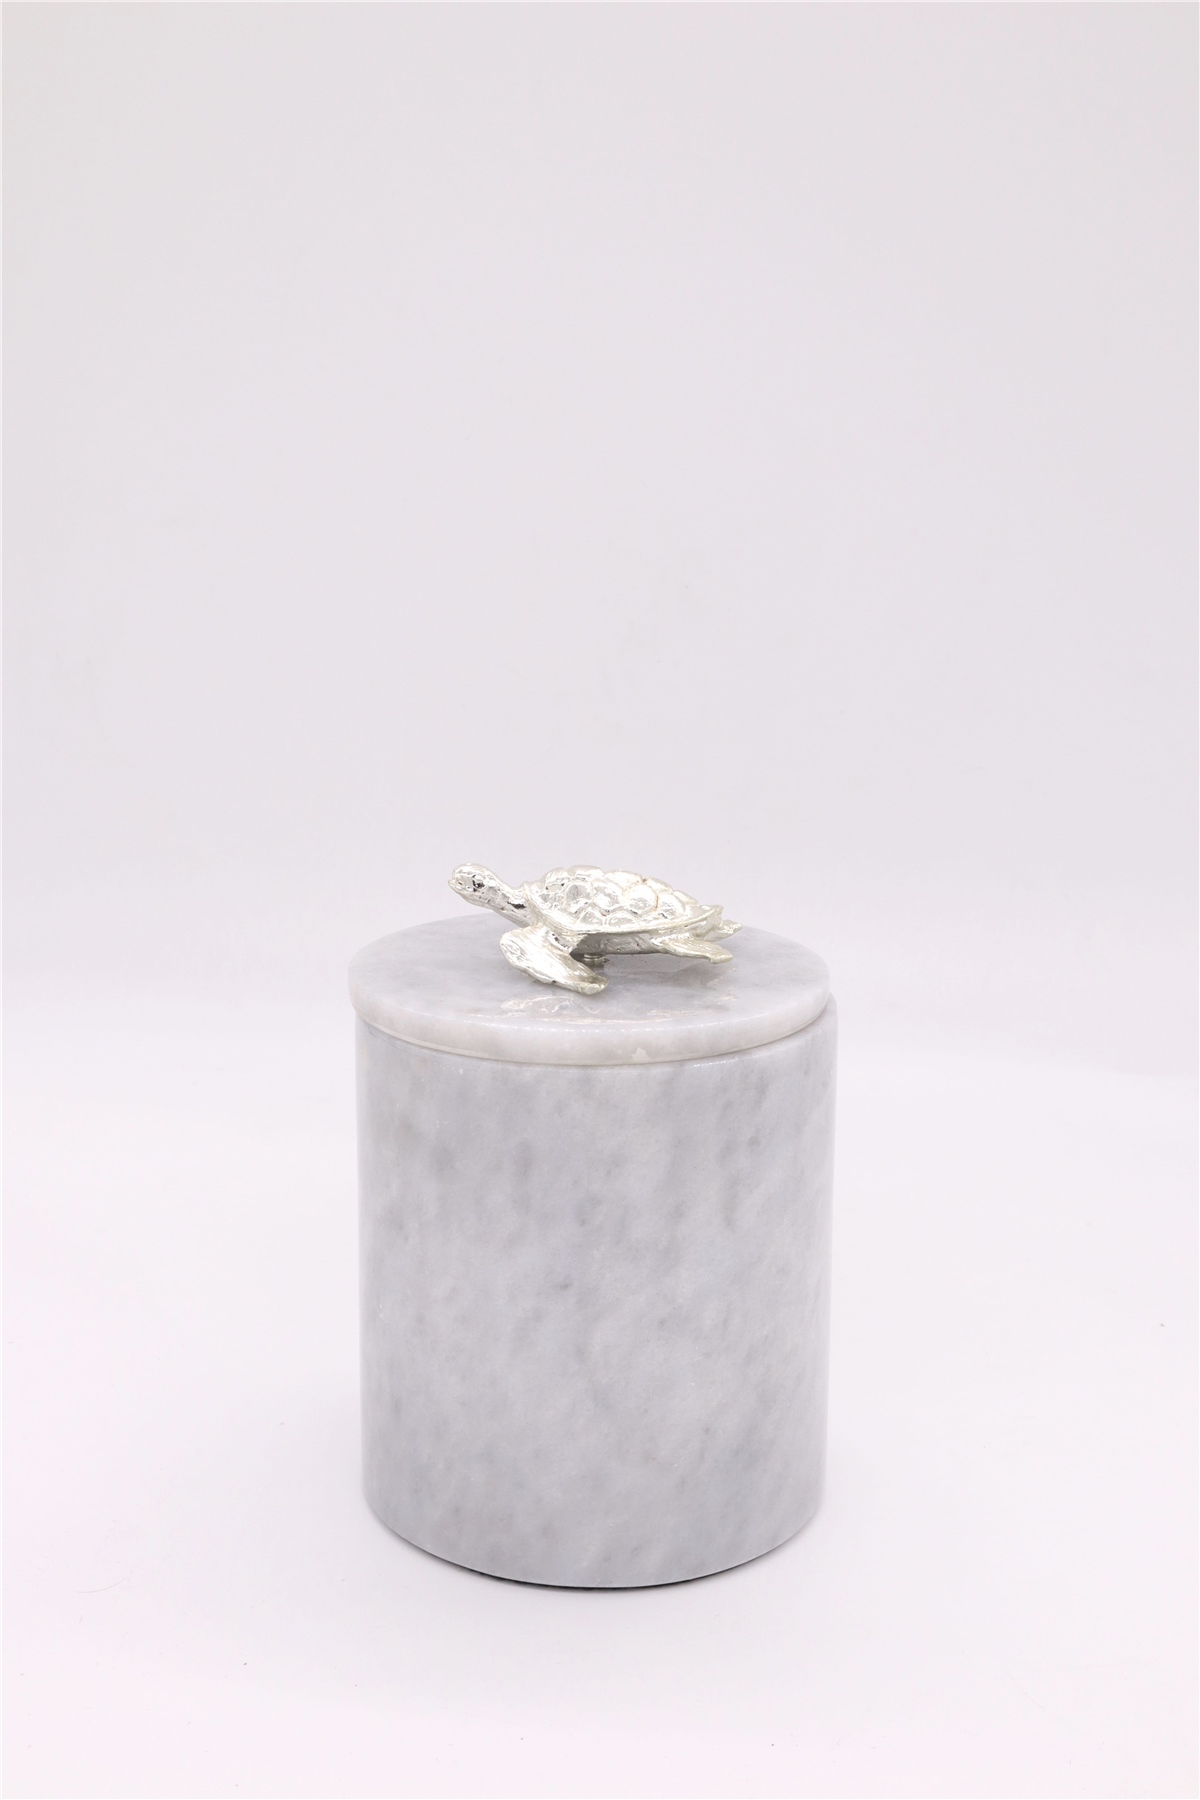 Sirmaison-Turtle Marble Candle Gray-30199194